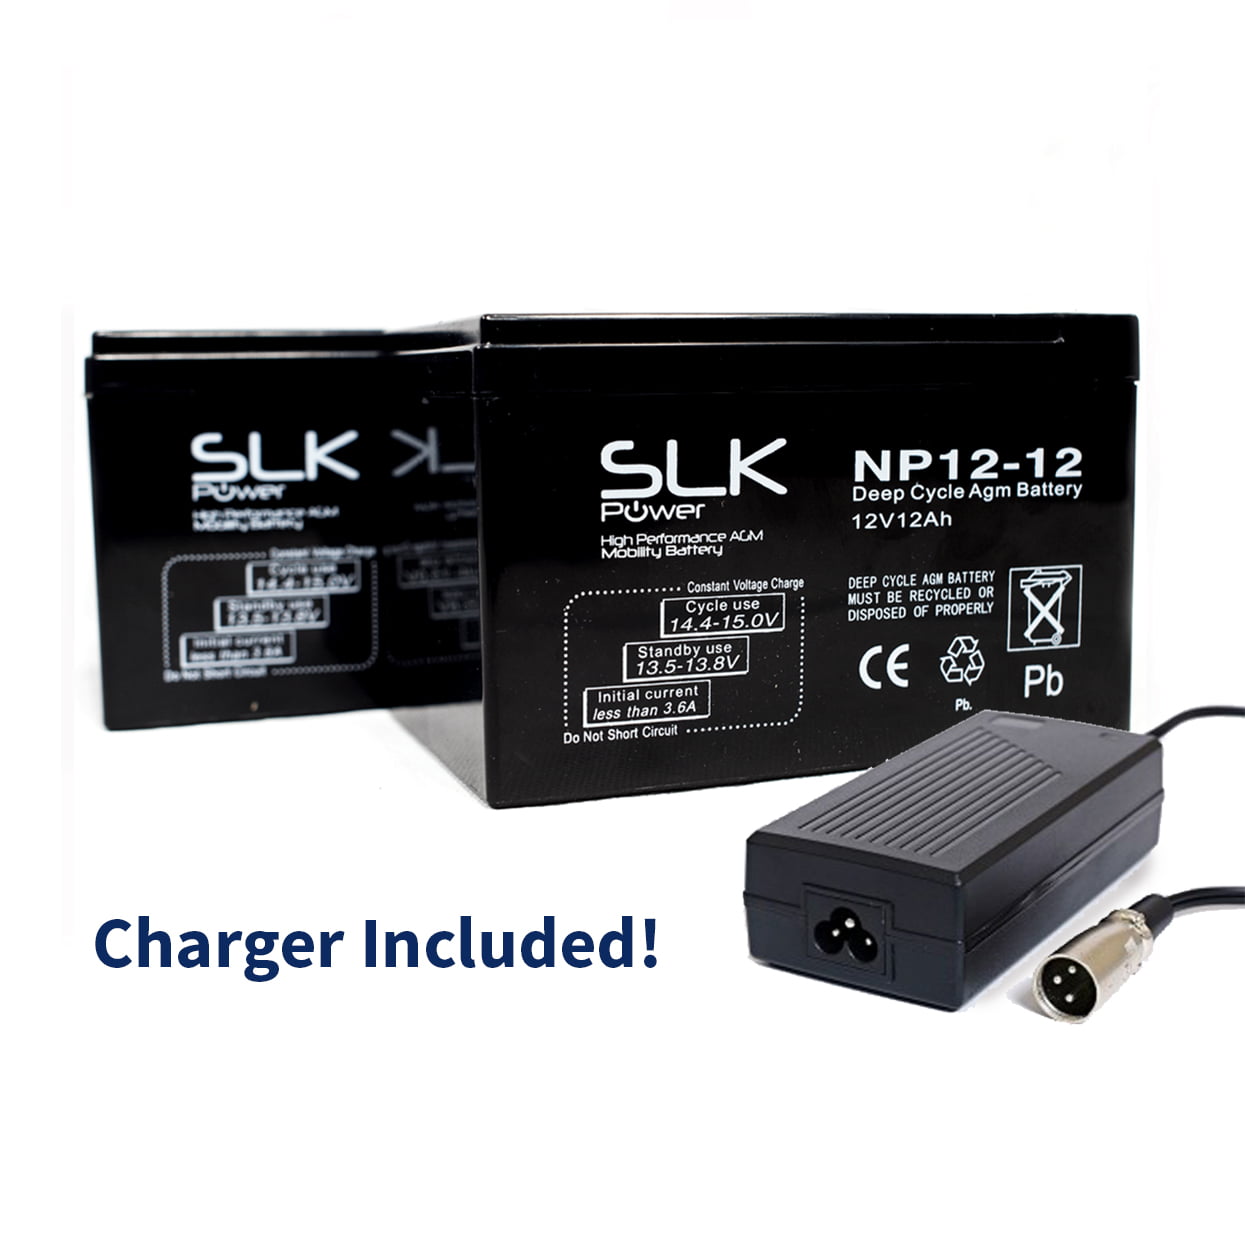 12ah Battery and Charger